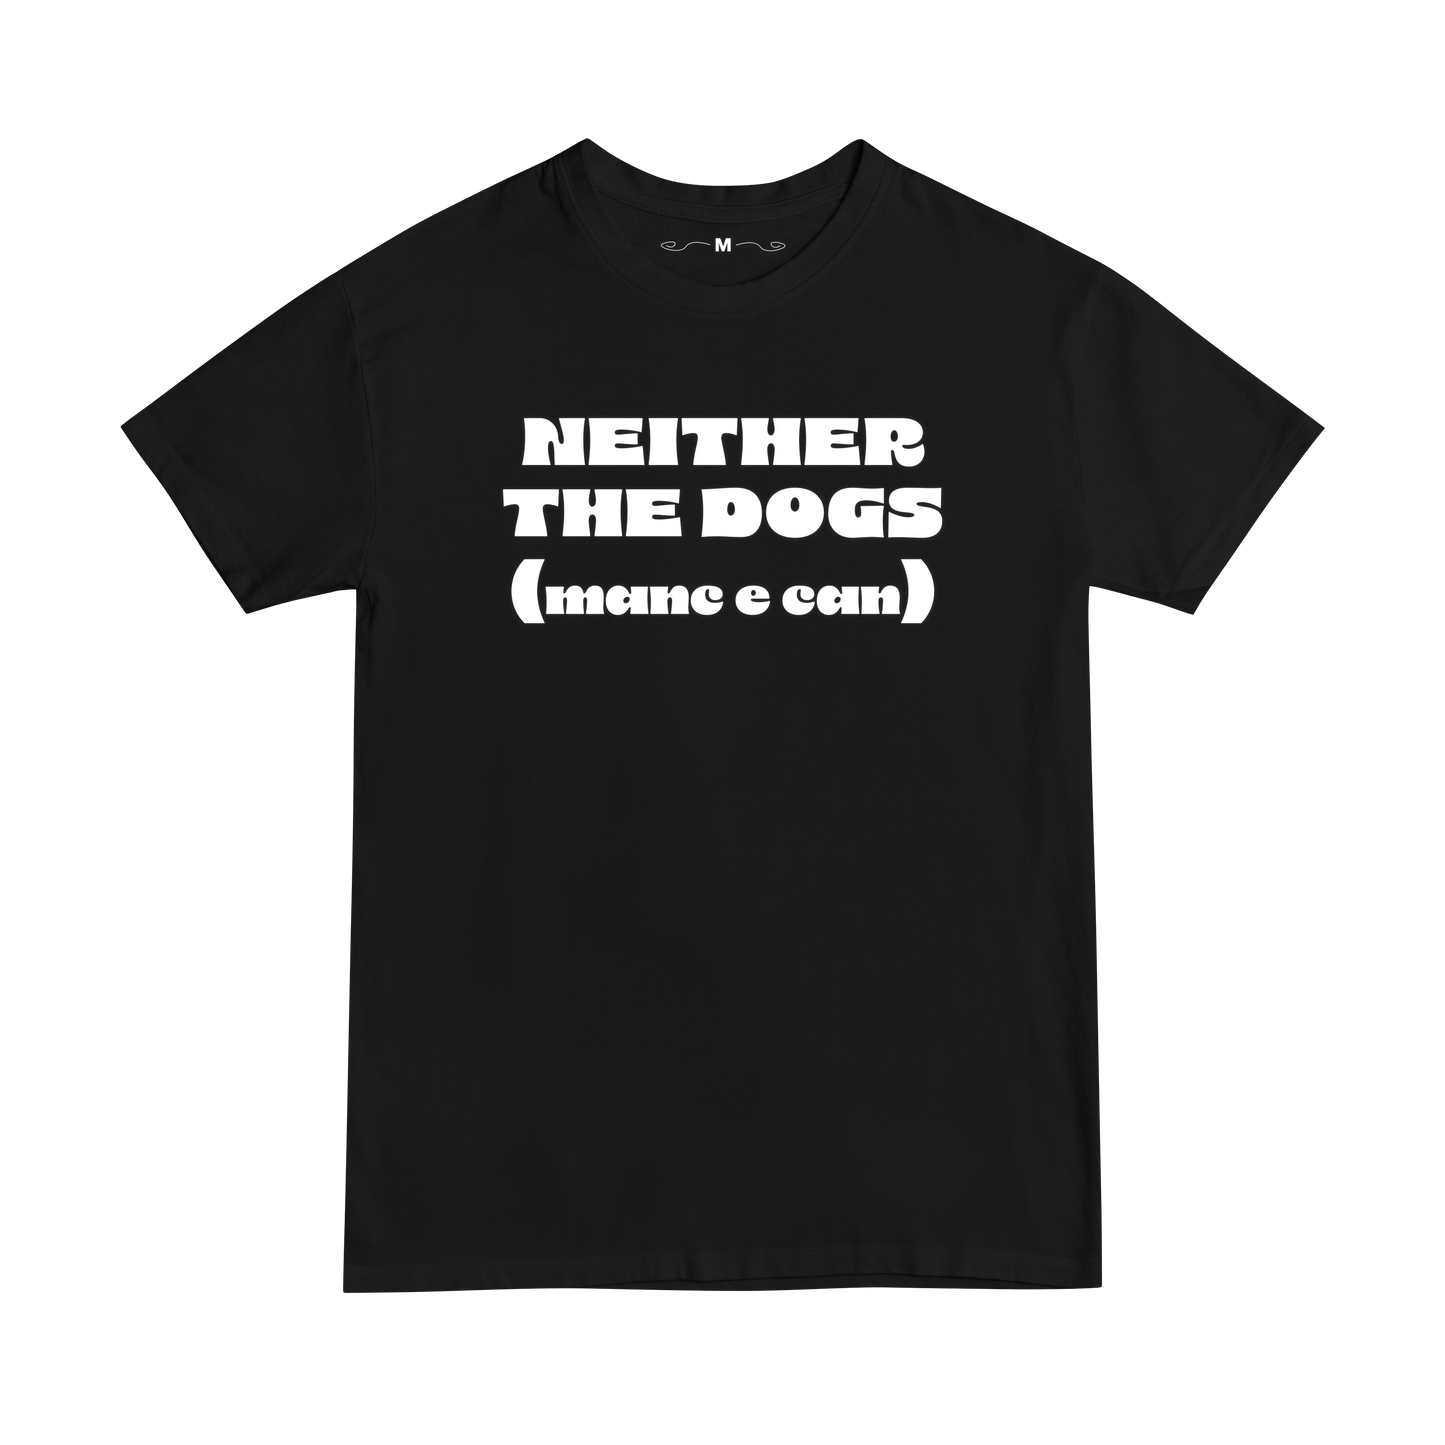 "NEITHER THE DOGS" TEE